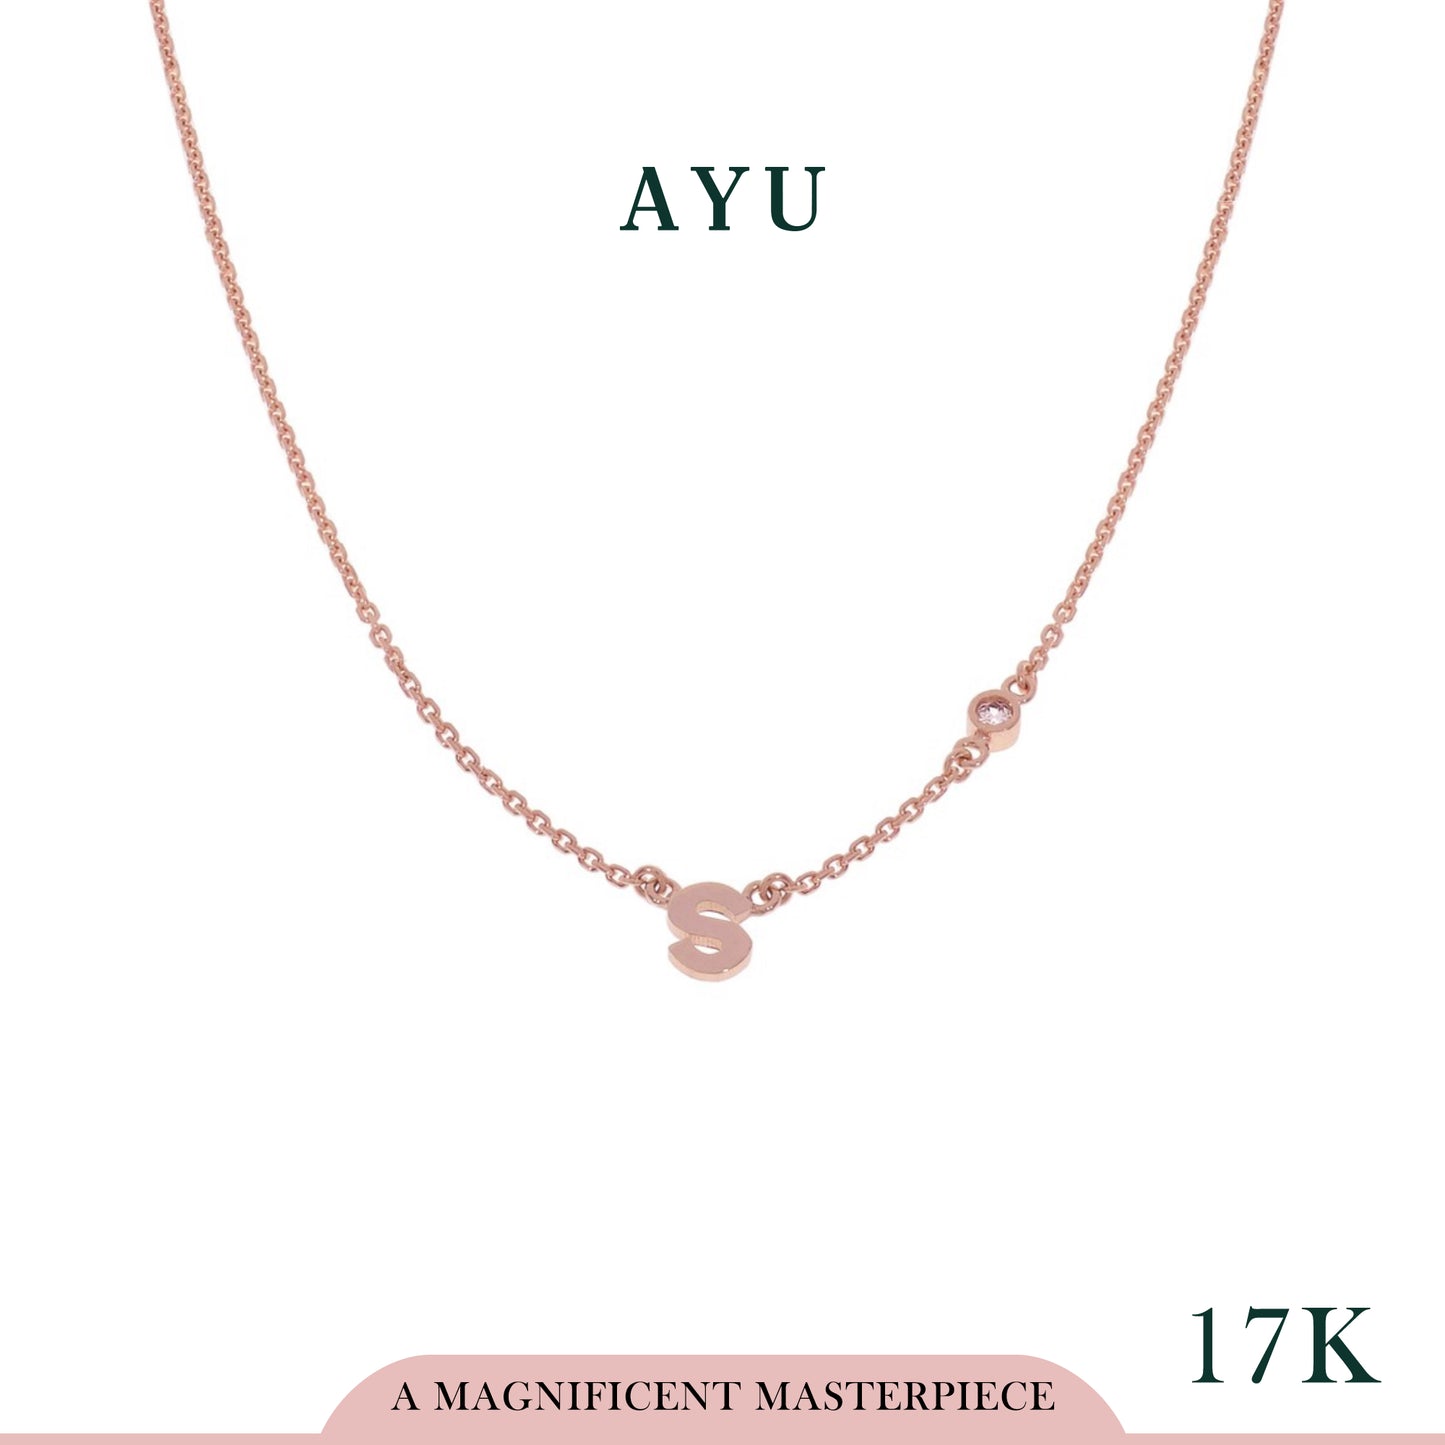 AYU GOLD INITIAL WITH MINI BEZEL CHAIN NECKLACE 17K ROSE GOLD